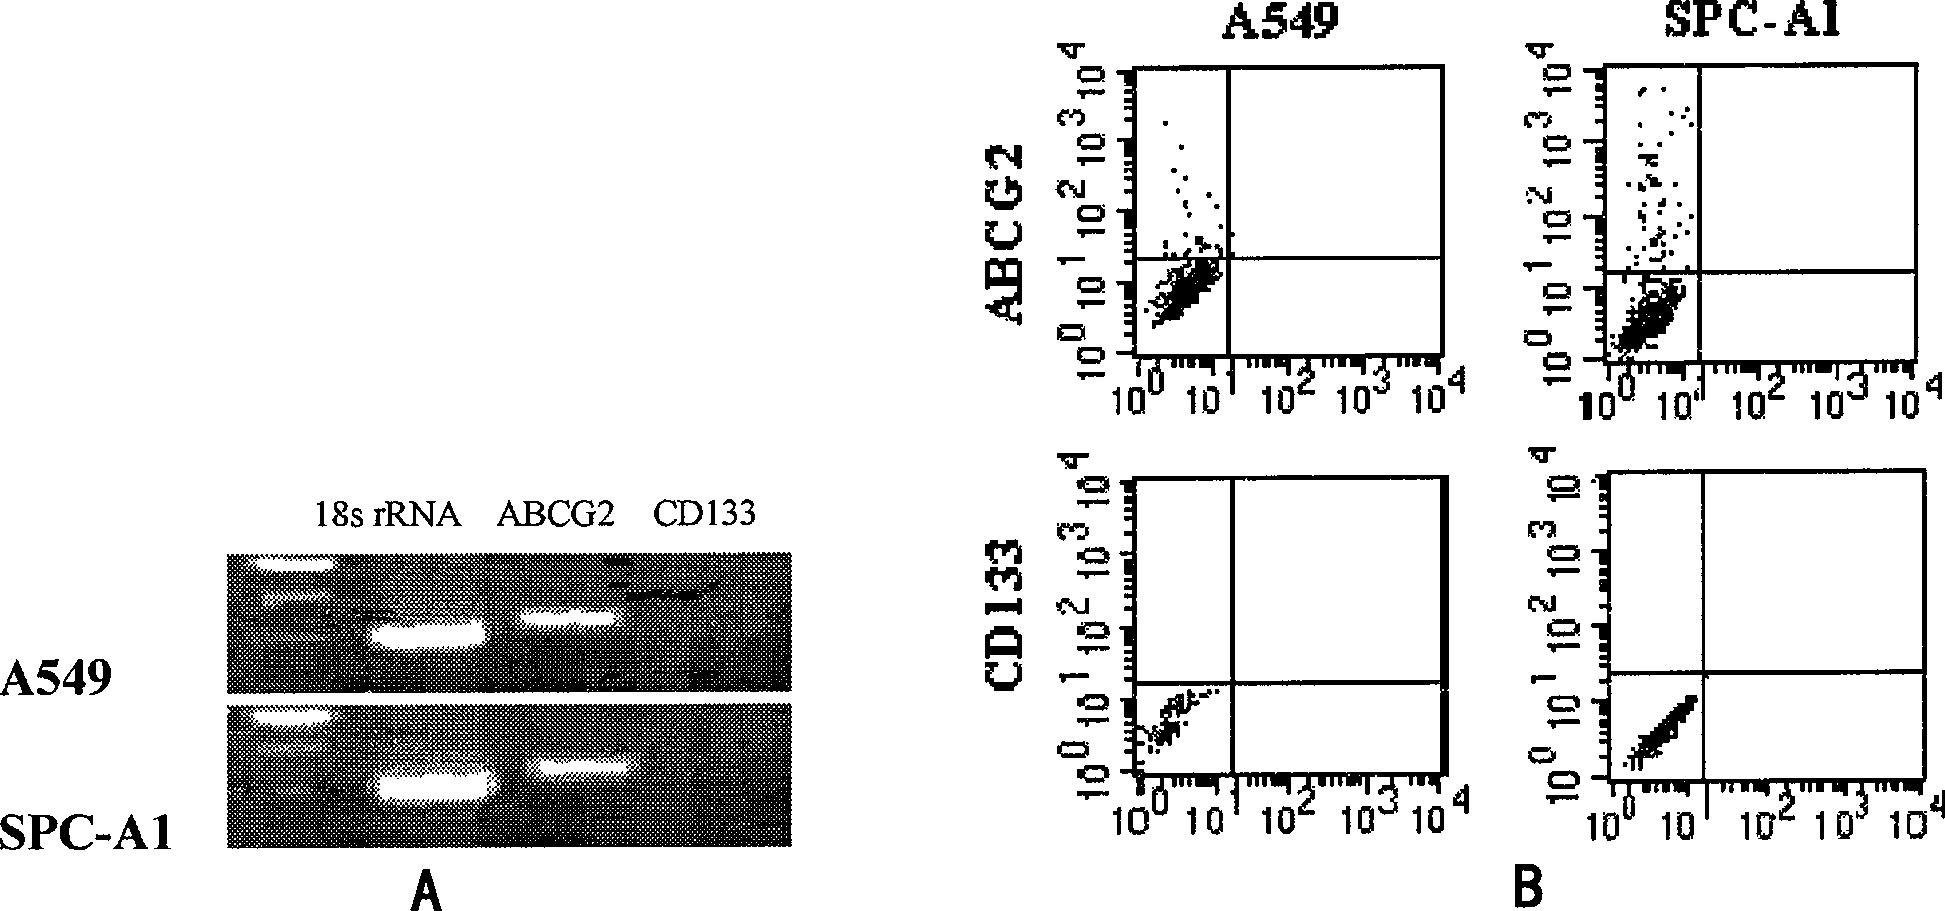 Method for isolating and identifying human lung adenocarcinoma stem cell